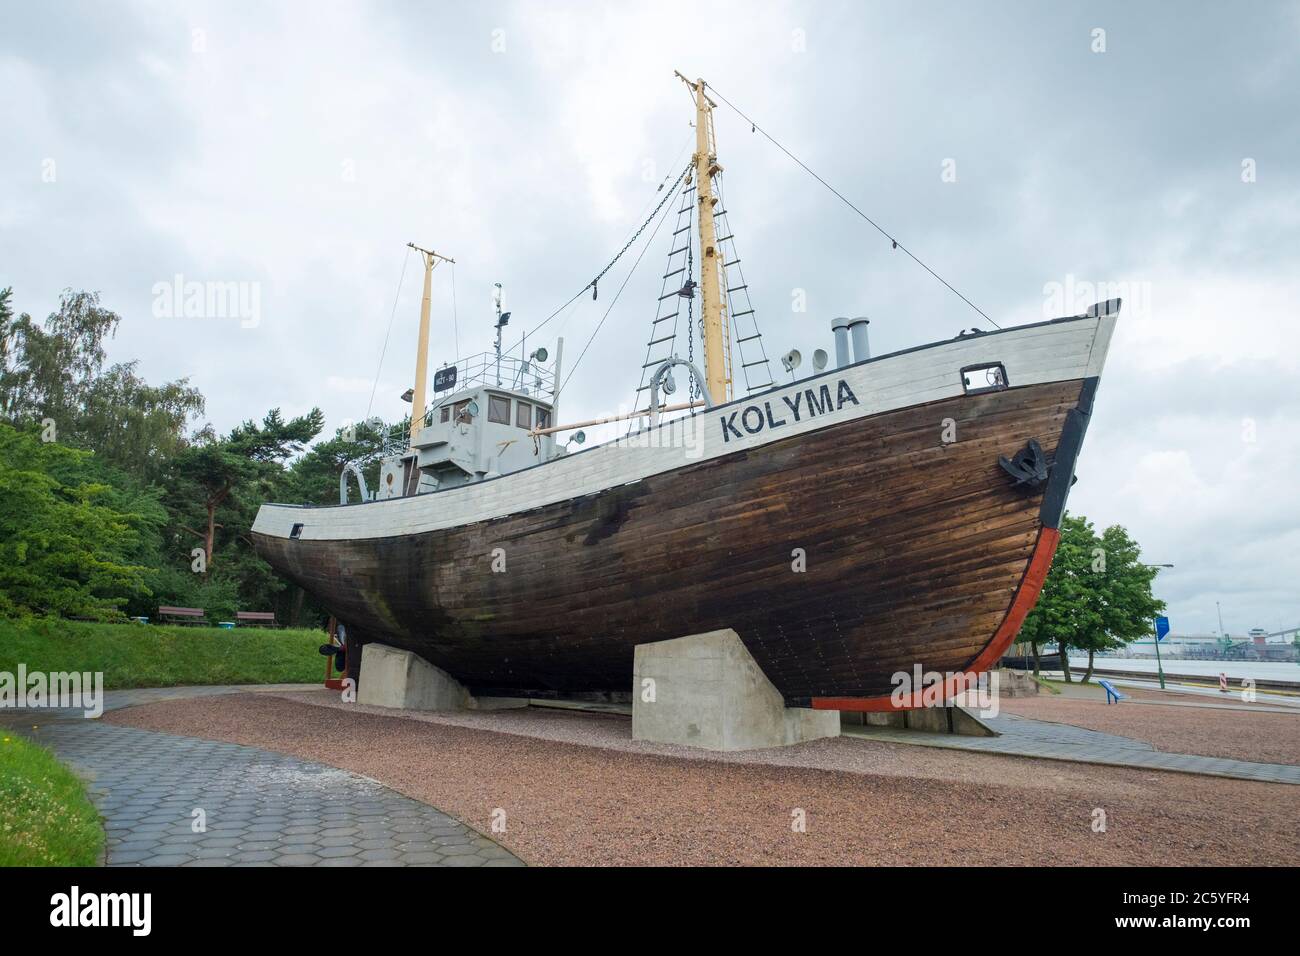 The historic Kolyma wooden fishing boat. At the Ethnographic Homestead Complex in Neringa, Lithuania. Stock Photo